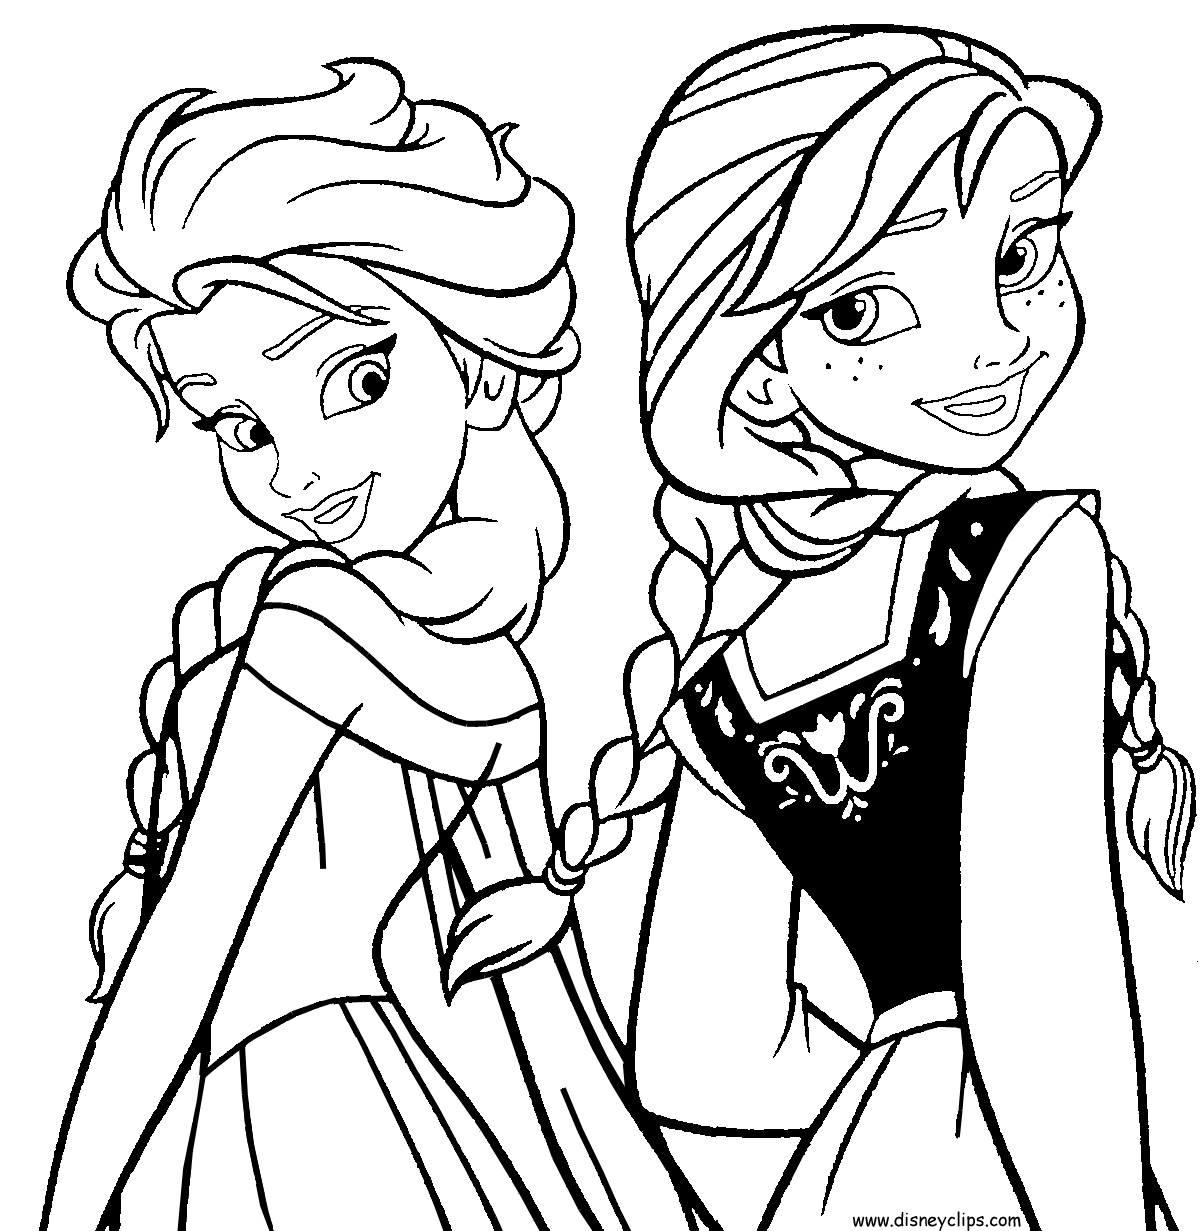 Coloring Pages ~ Free Frozen Coloring Pages For - Free Printable Coloring Pages Disney Frozen